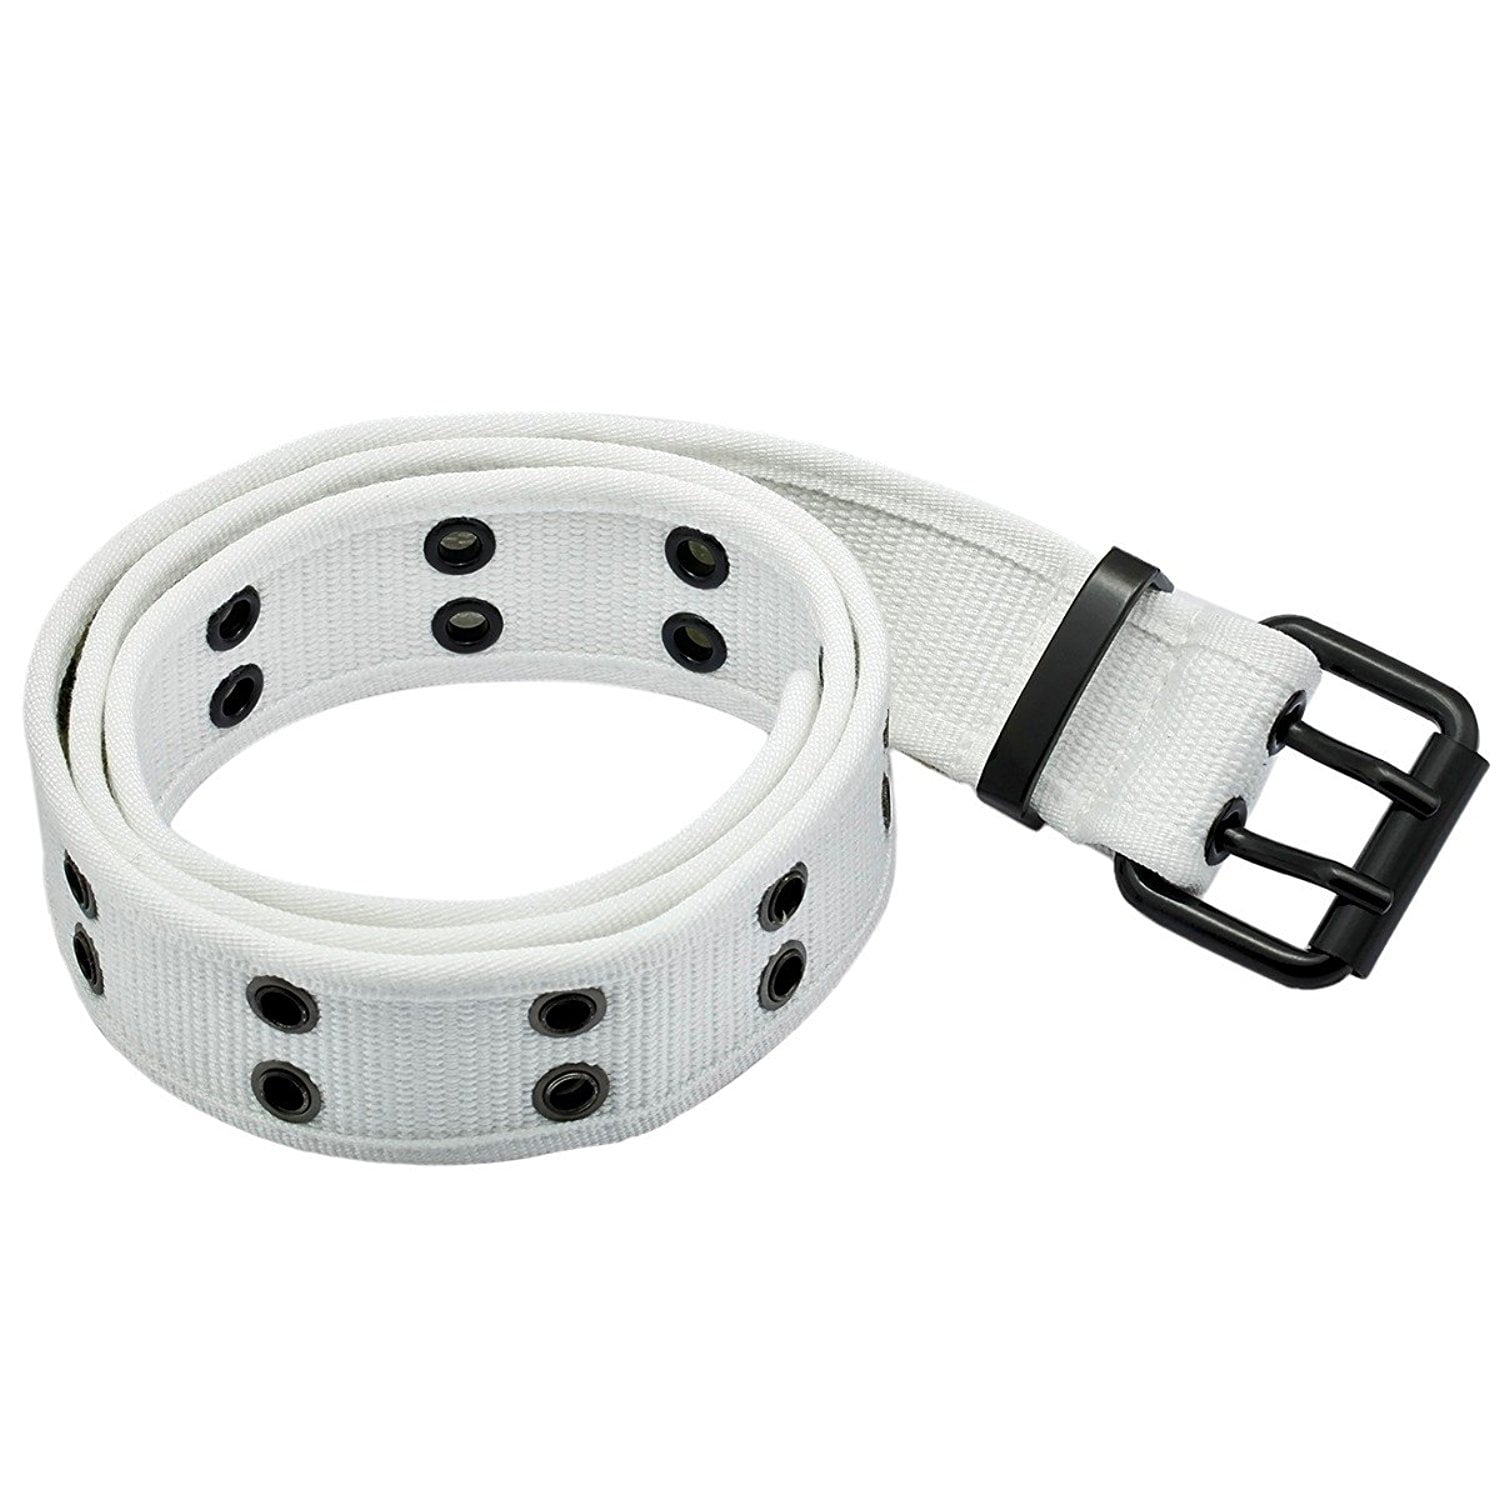 Double Hole Grommets Canvas Web Belt with Forged Black Buckle for Women 